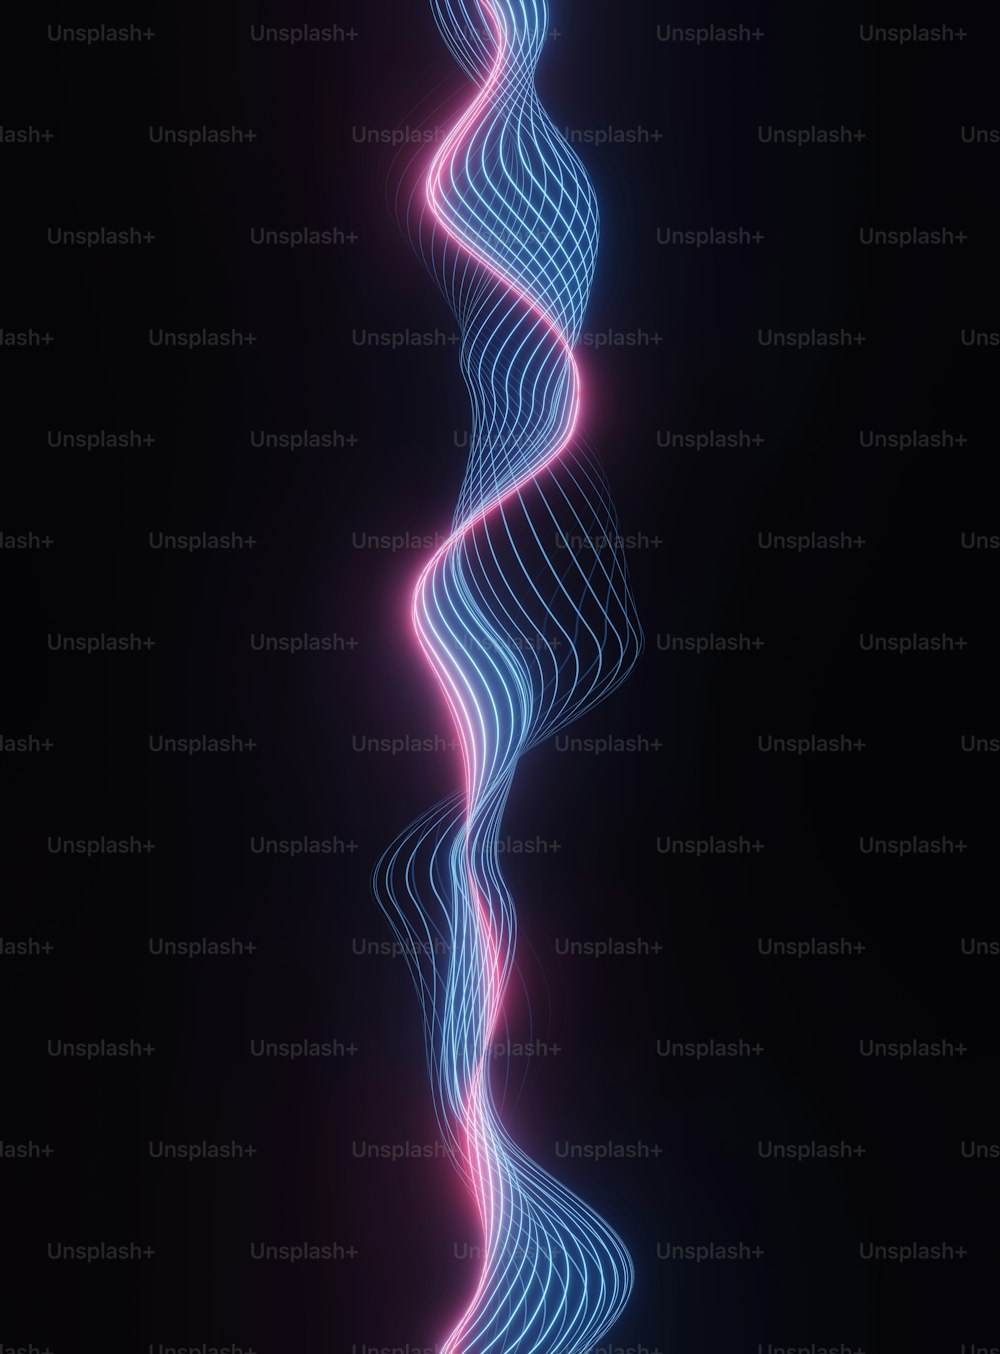 a blue and pink swirl on a black background